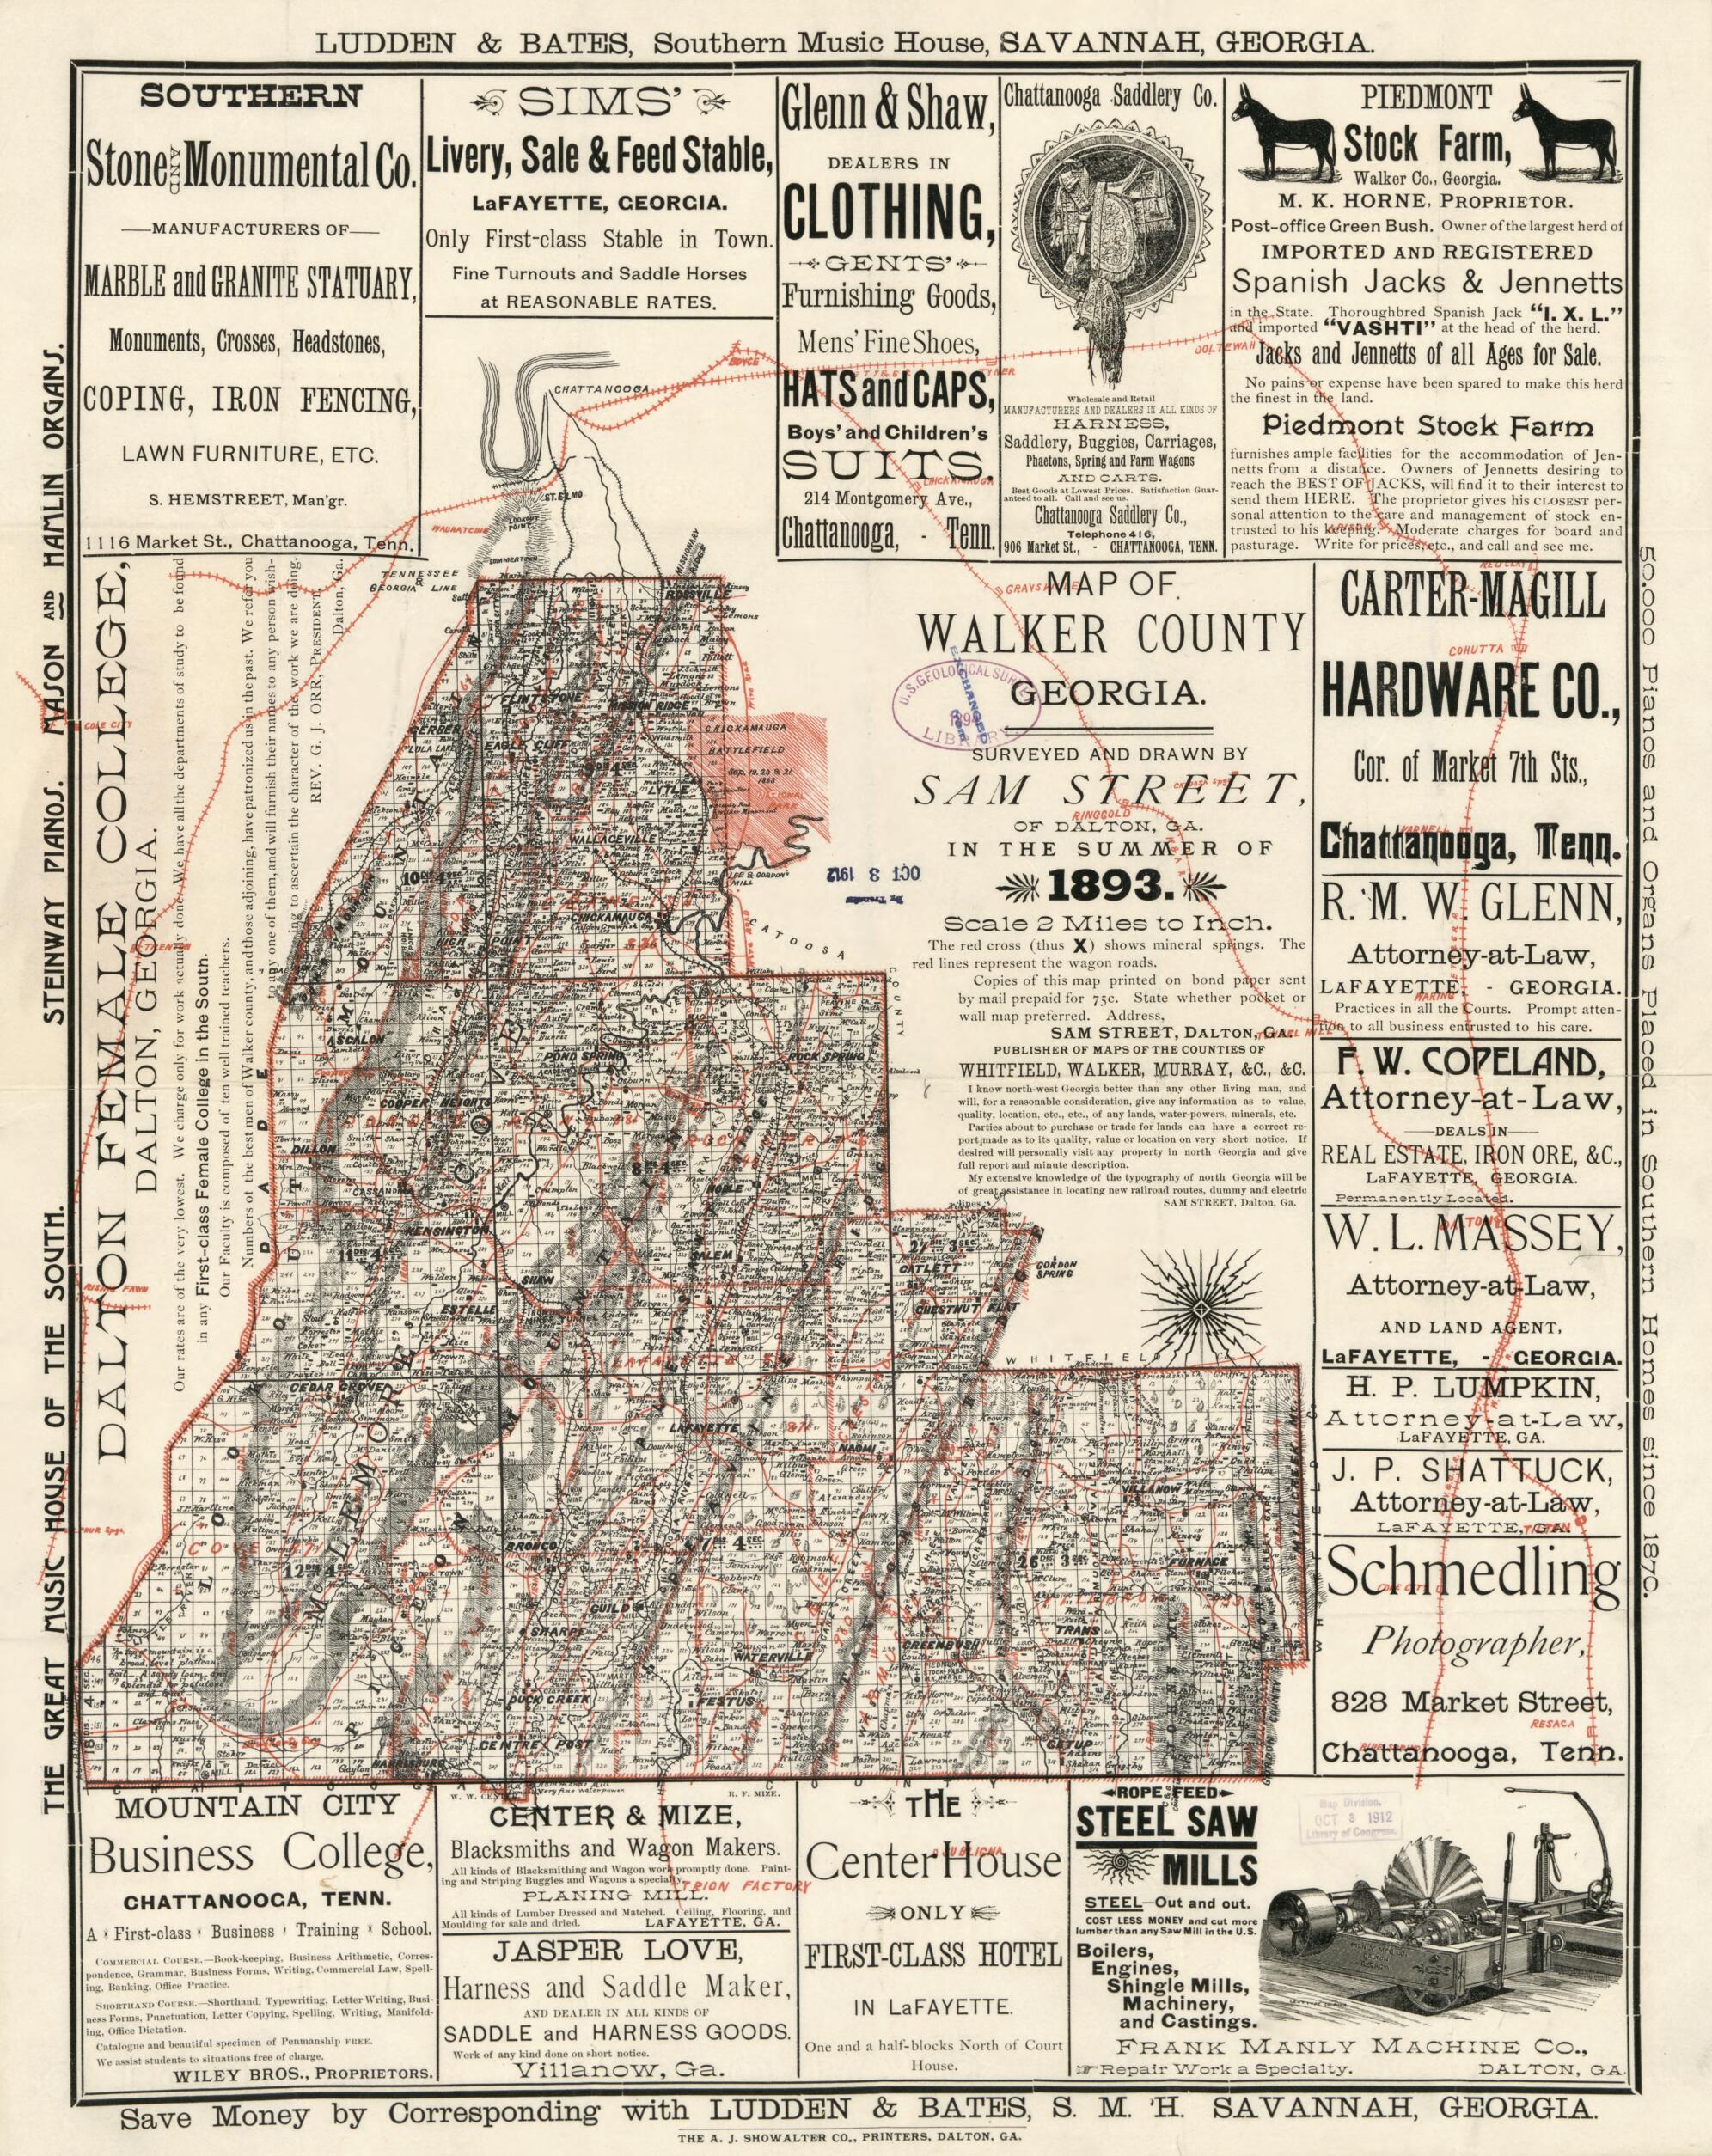 This old map of Map of Walker County, Georgia from 1893 was created by Samuel M. Street in 1893